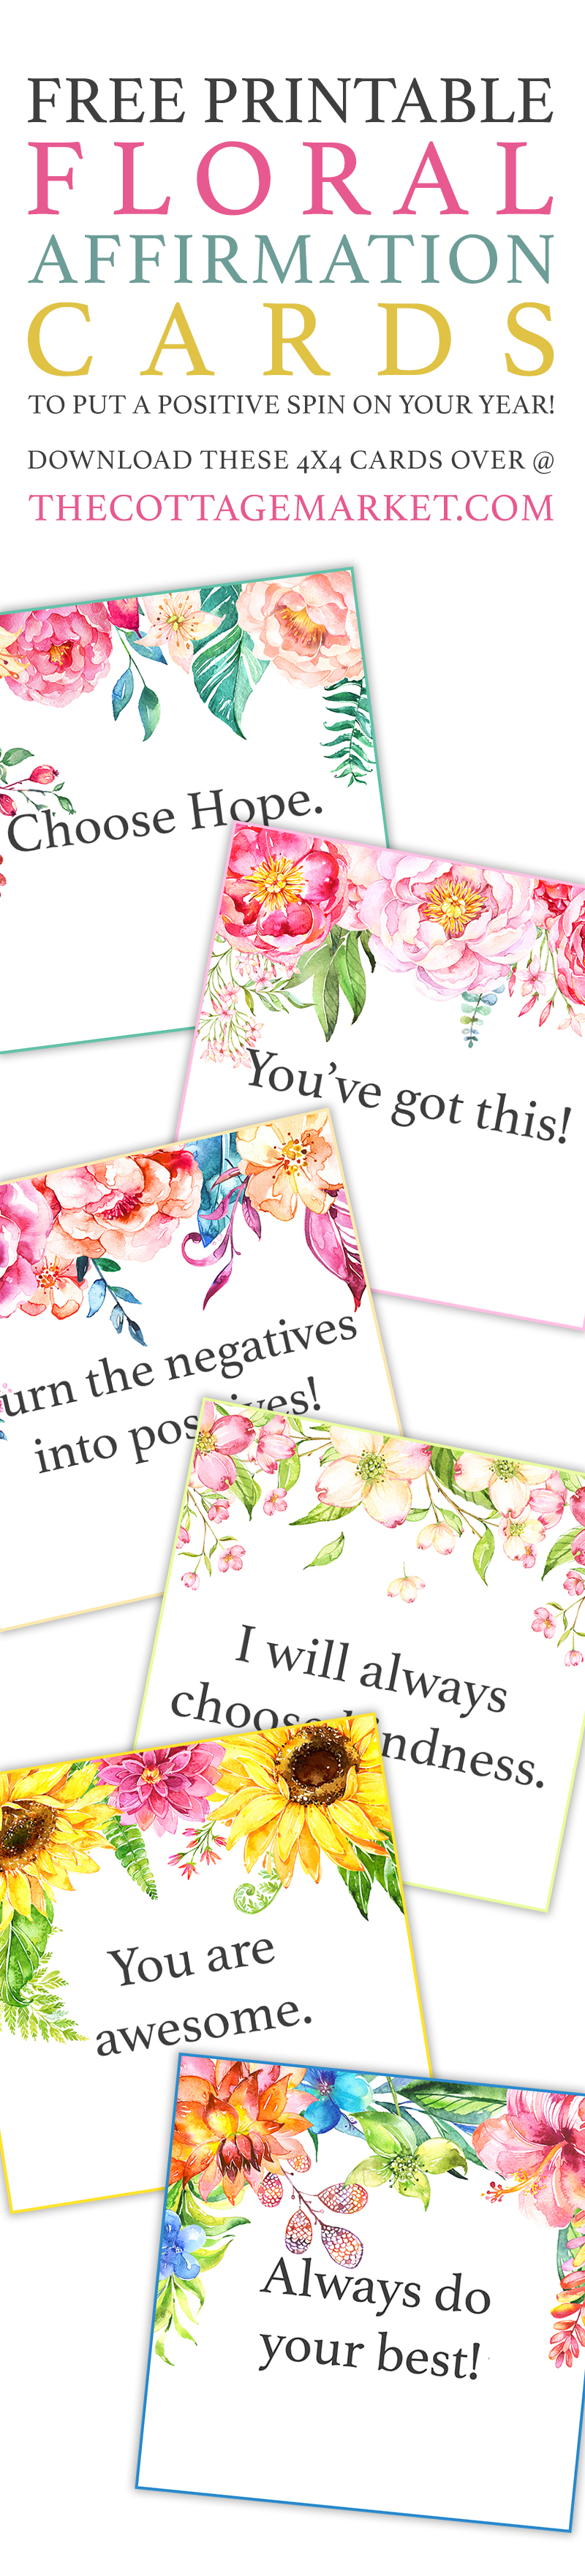 Free Printable Floral Affirmation Cards /// To Put A Positive Spin - Free Printable Positive Affirmation Cards